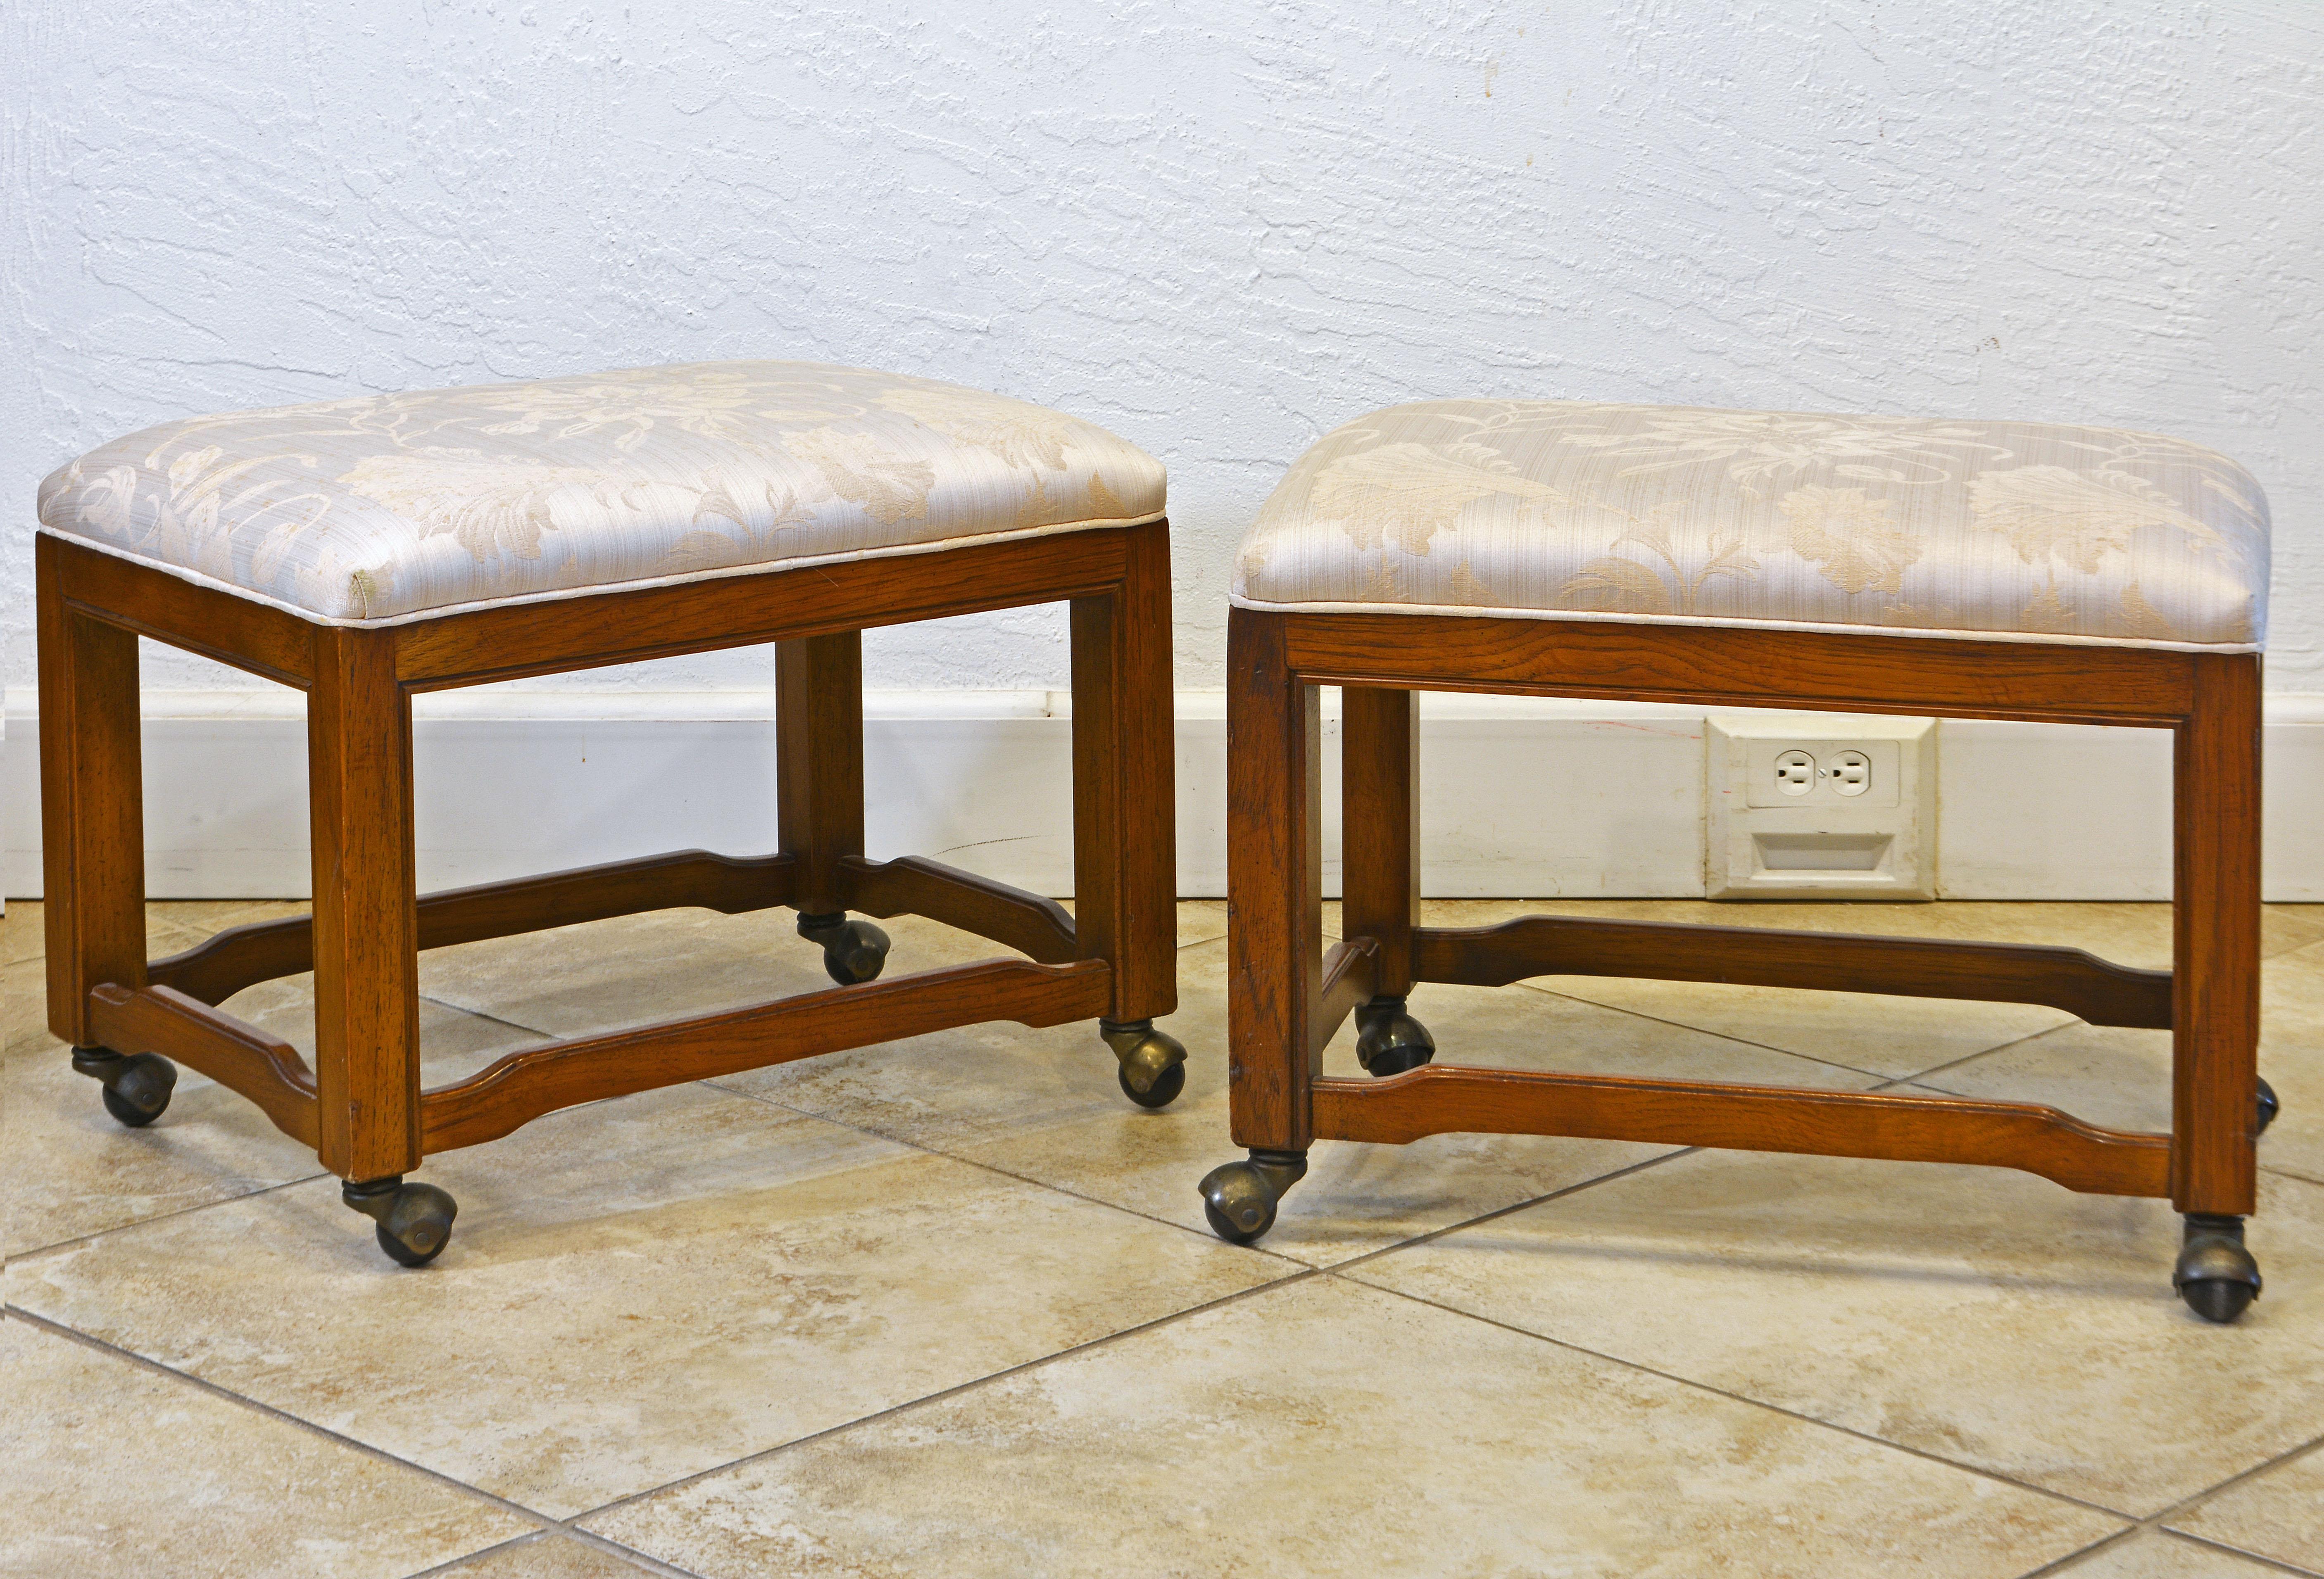 These upholstered benches by Drexel Heritage arevery useful because of the well functioning wheels. The are designed in the mid century style with a chinoiserie twist. The walnut frames are sturdy and well detailed. The seats are covered by a damask